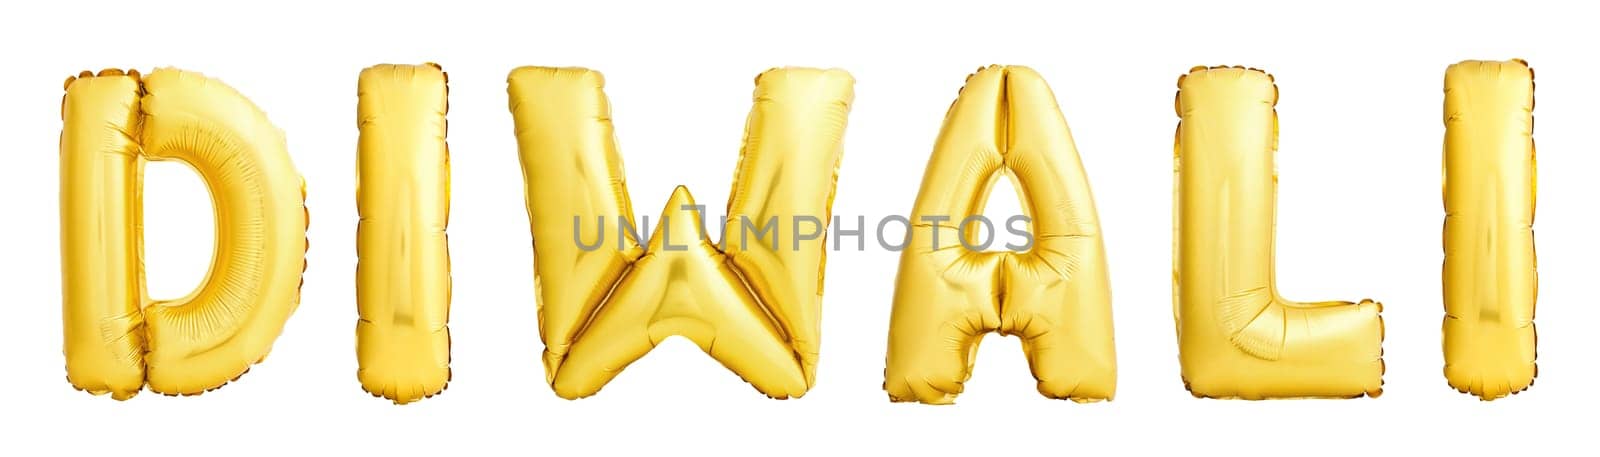 Indian Diwali festival name made of golden inflatable balloon isolated on white background